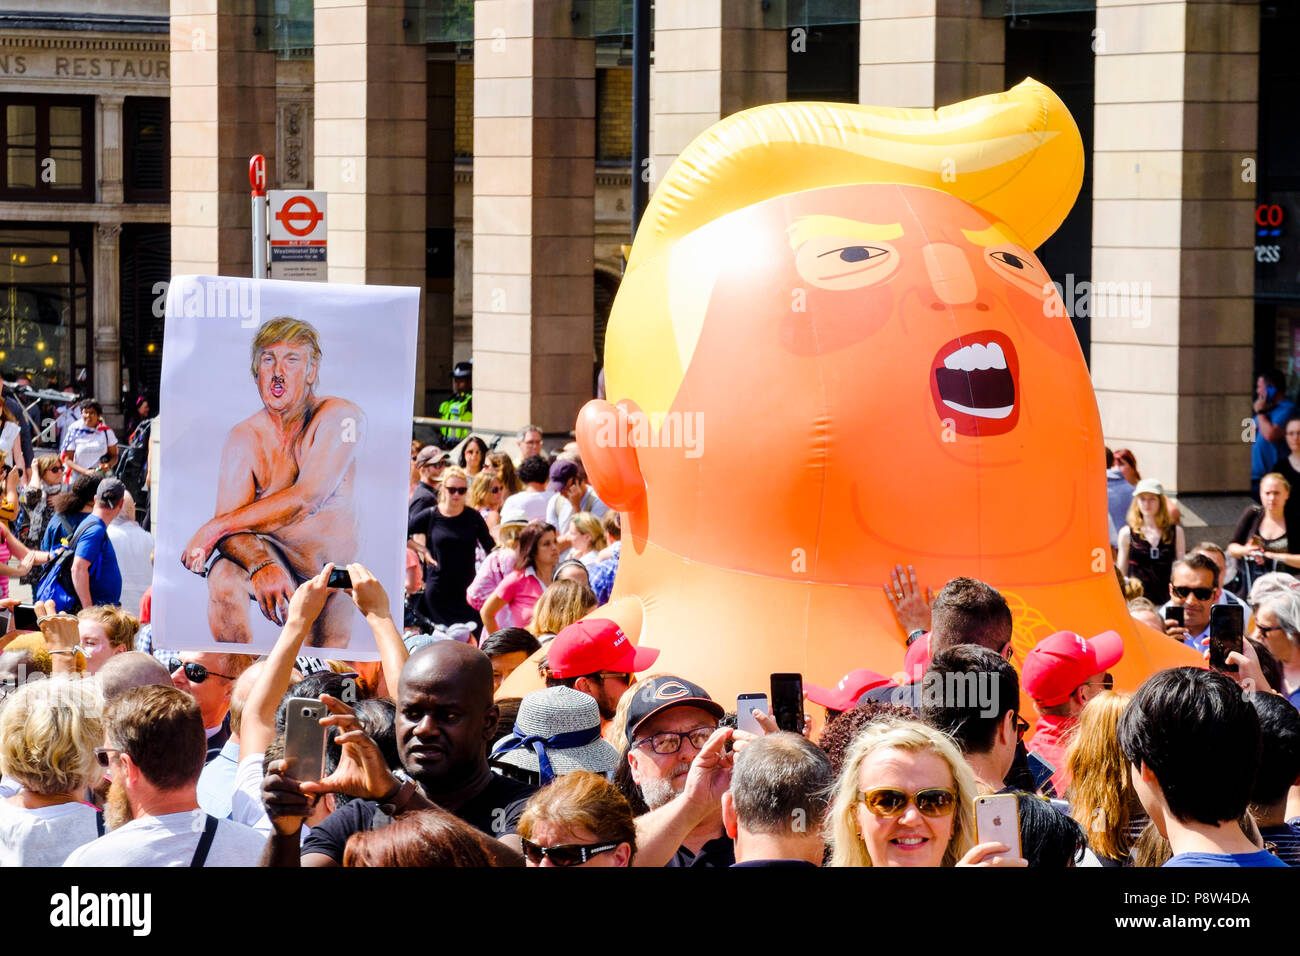 London, UK. 13th July 2018. Tens of thousands of people took to the streets of central London to protest against US President Donald Trump's visit to the UK. Pictured: A reproduction of Illma Gore's portrait of Donald Trump alongside a baby Trump inflatable during the London protests. Credit: mark phillips/Alamy Live News Stock Photo